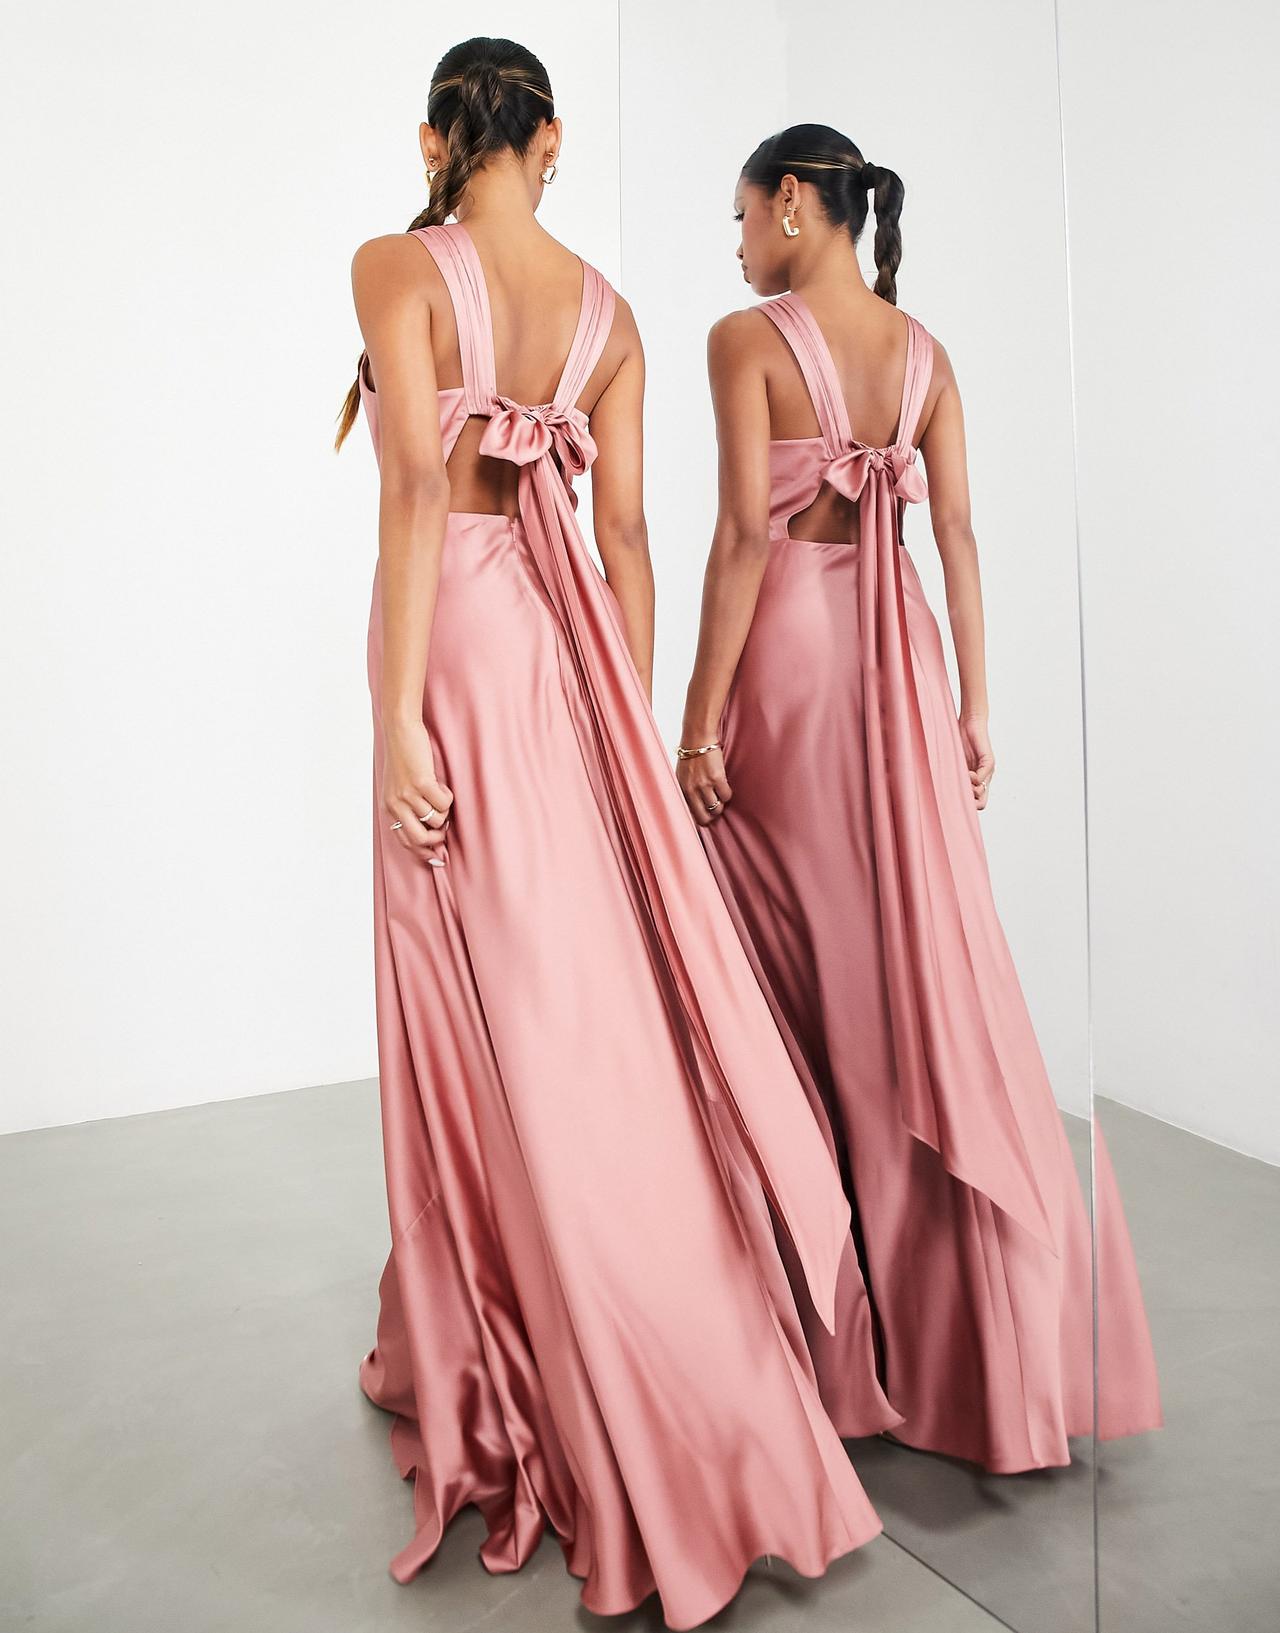 26 Satin Bridesmaids Dresses That Your Girls Will Adore -  